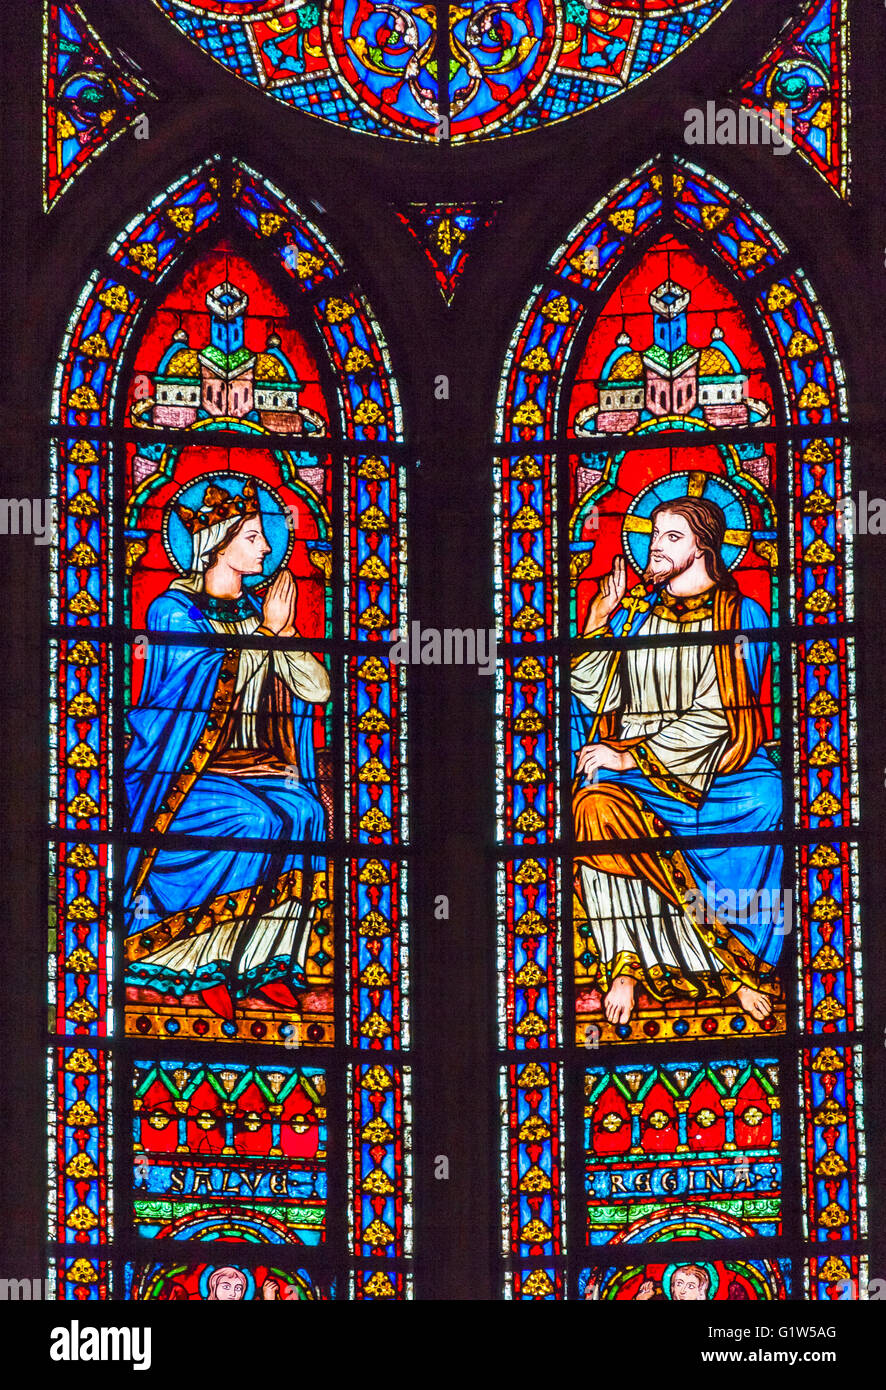 Jesus Christ Mary Stained Glass Notre Dame Cathedral Paris France.  Notre Dame was built between 1163 and 1250 AD. Stock Photo